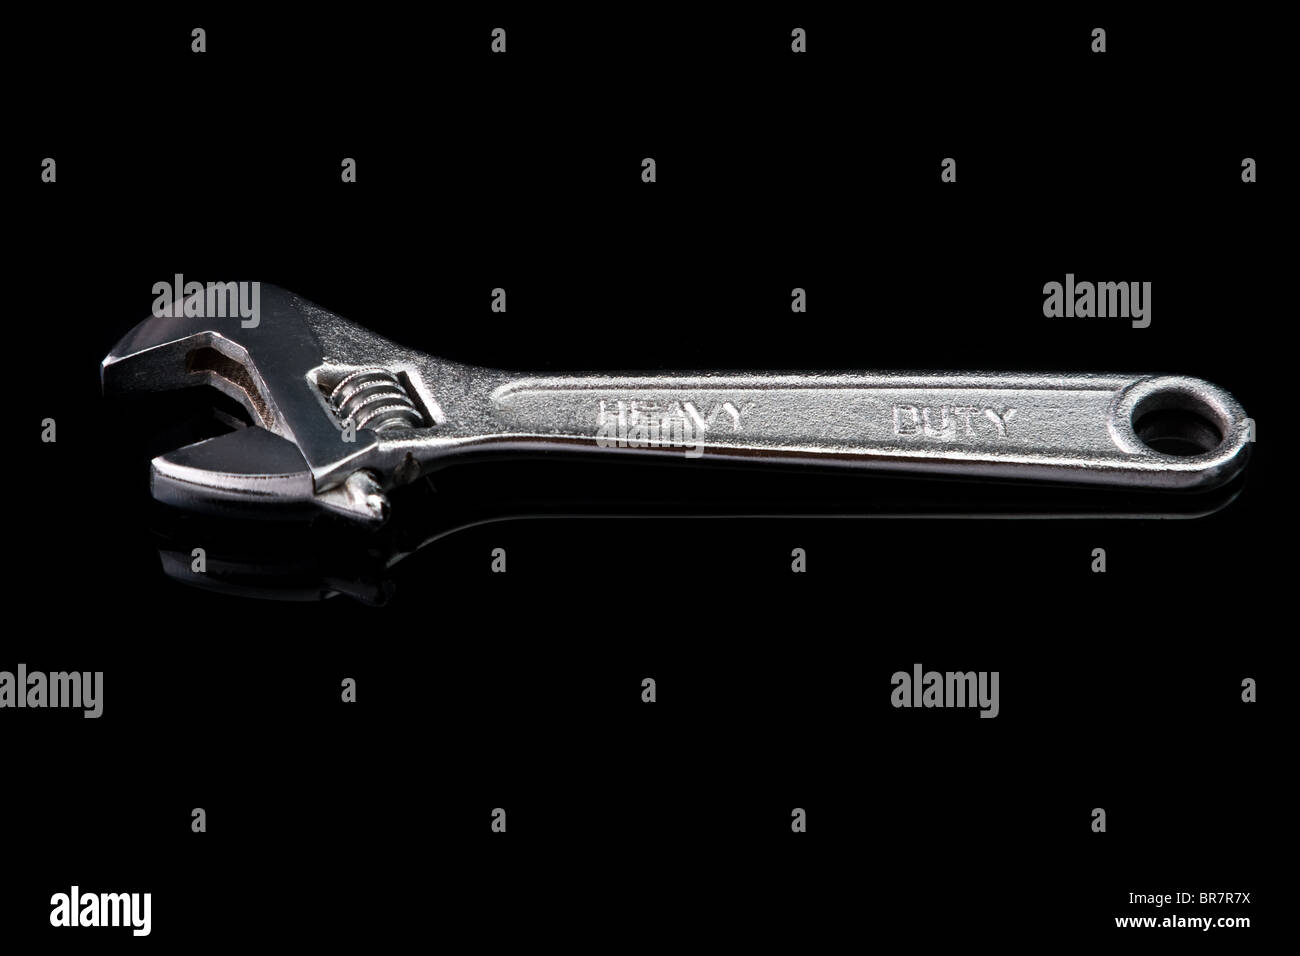 Adjustable chrome wrench. Isolated on black with reflection. Stock Photo